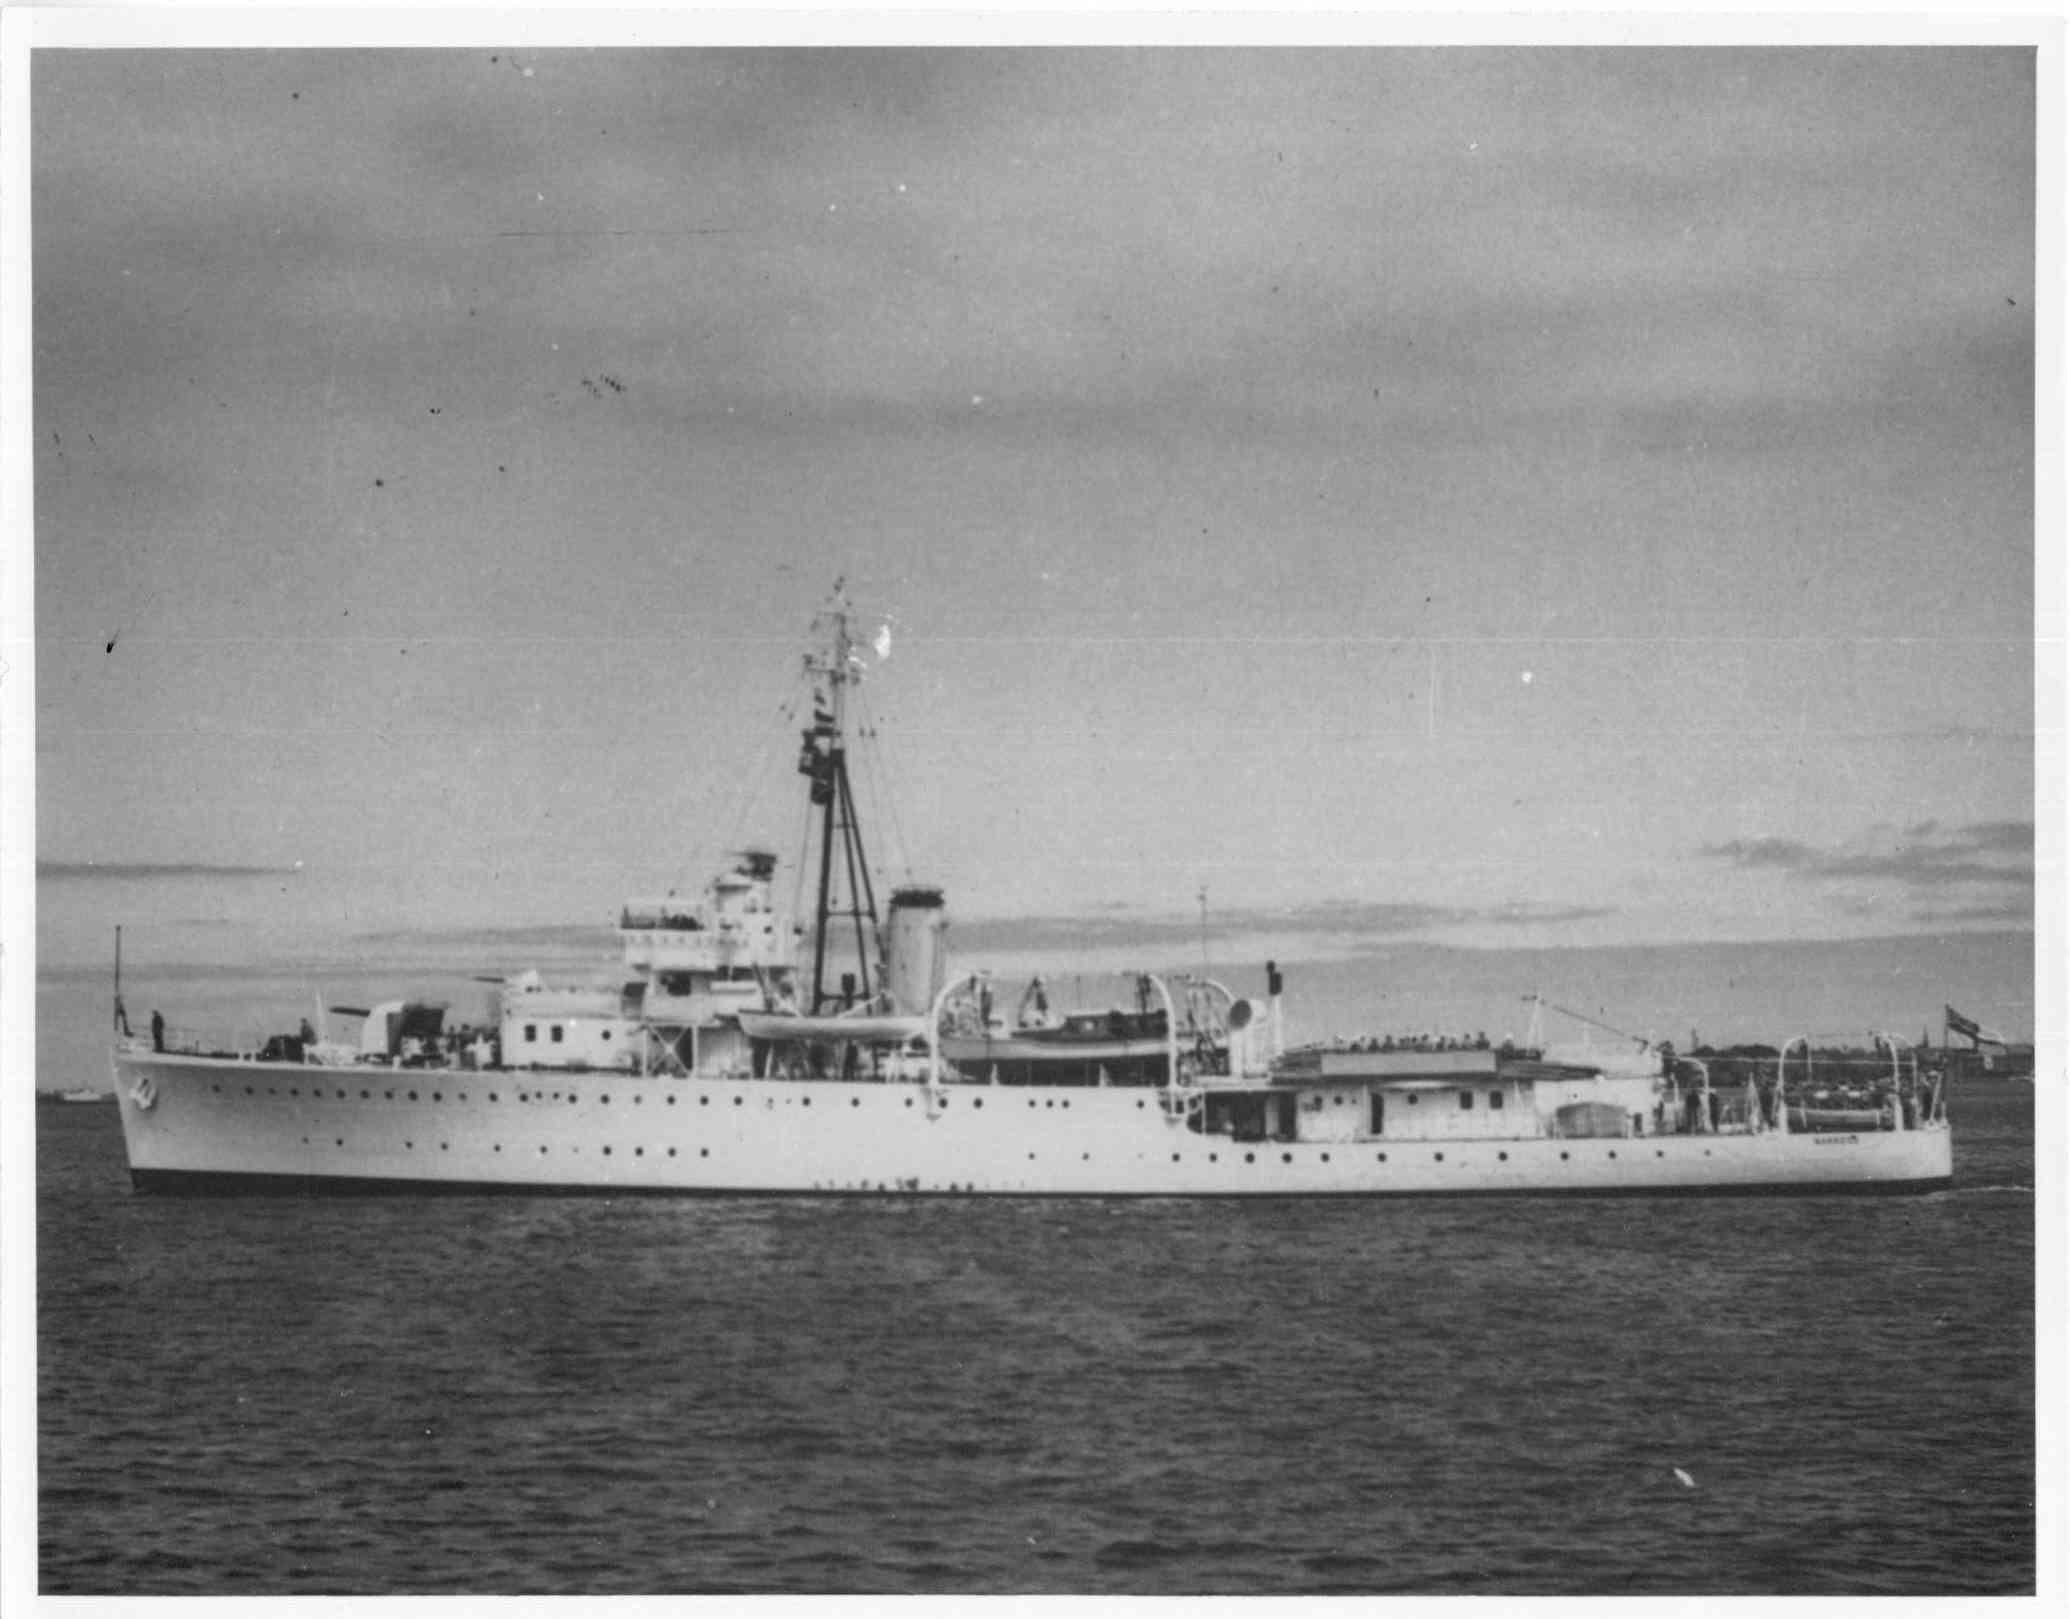 H.M.A.S. "Warrego",one of four grimsby class sloops, built at Cockatoo Island, Sydney in 1940.  She served in New Guinea in 1942, the Phillipppines in 1944, and was at the Lingayen Gulf and Balikpapan Landings.  Post war warrego became a training and surv